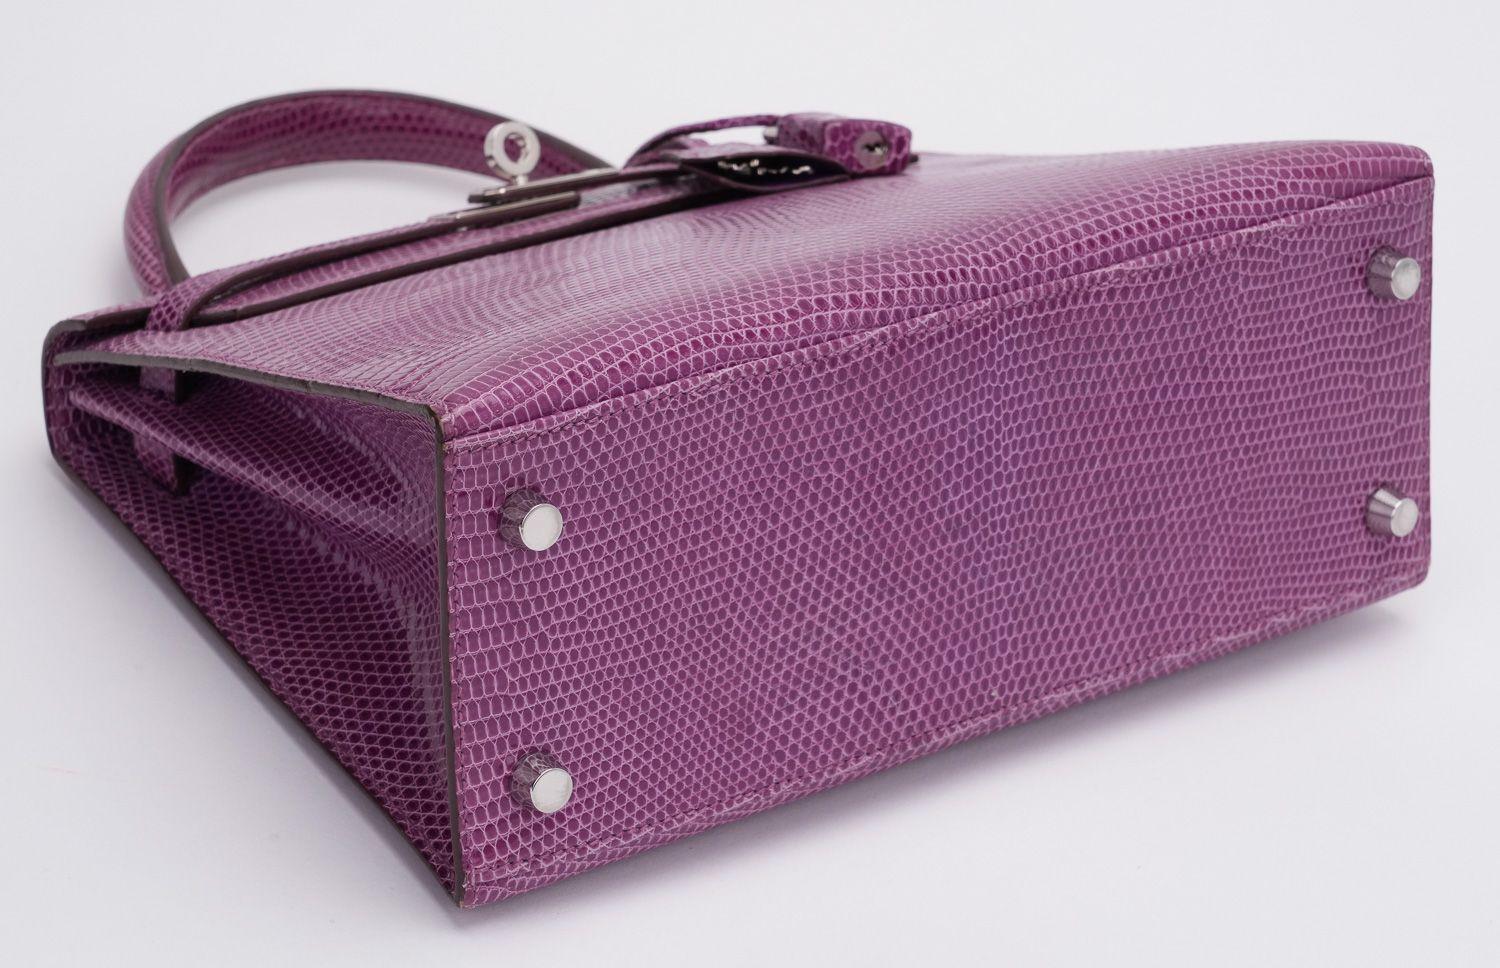 Hermès Rare Kelly 25 Sellier Lizard Violet In Excellent Condition For Sale In West Hollywood, CA